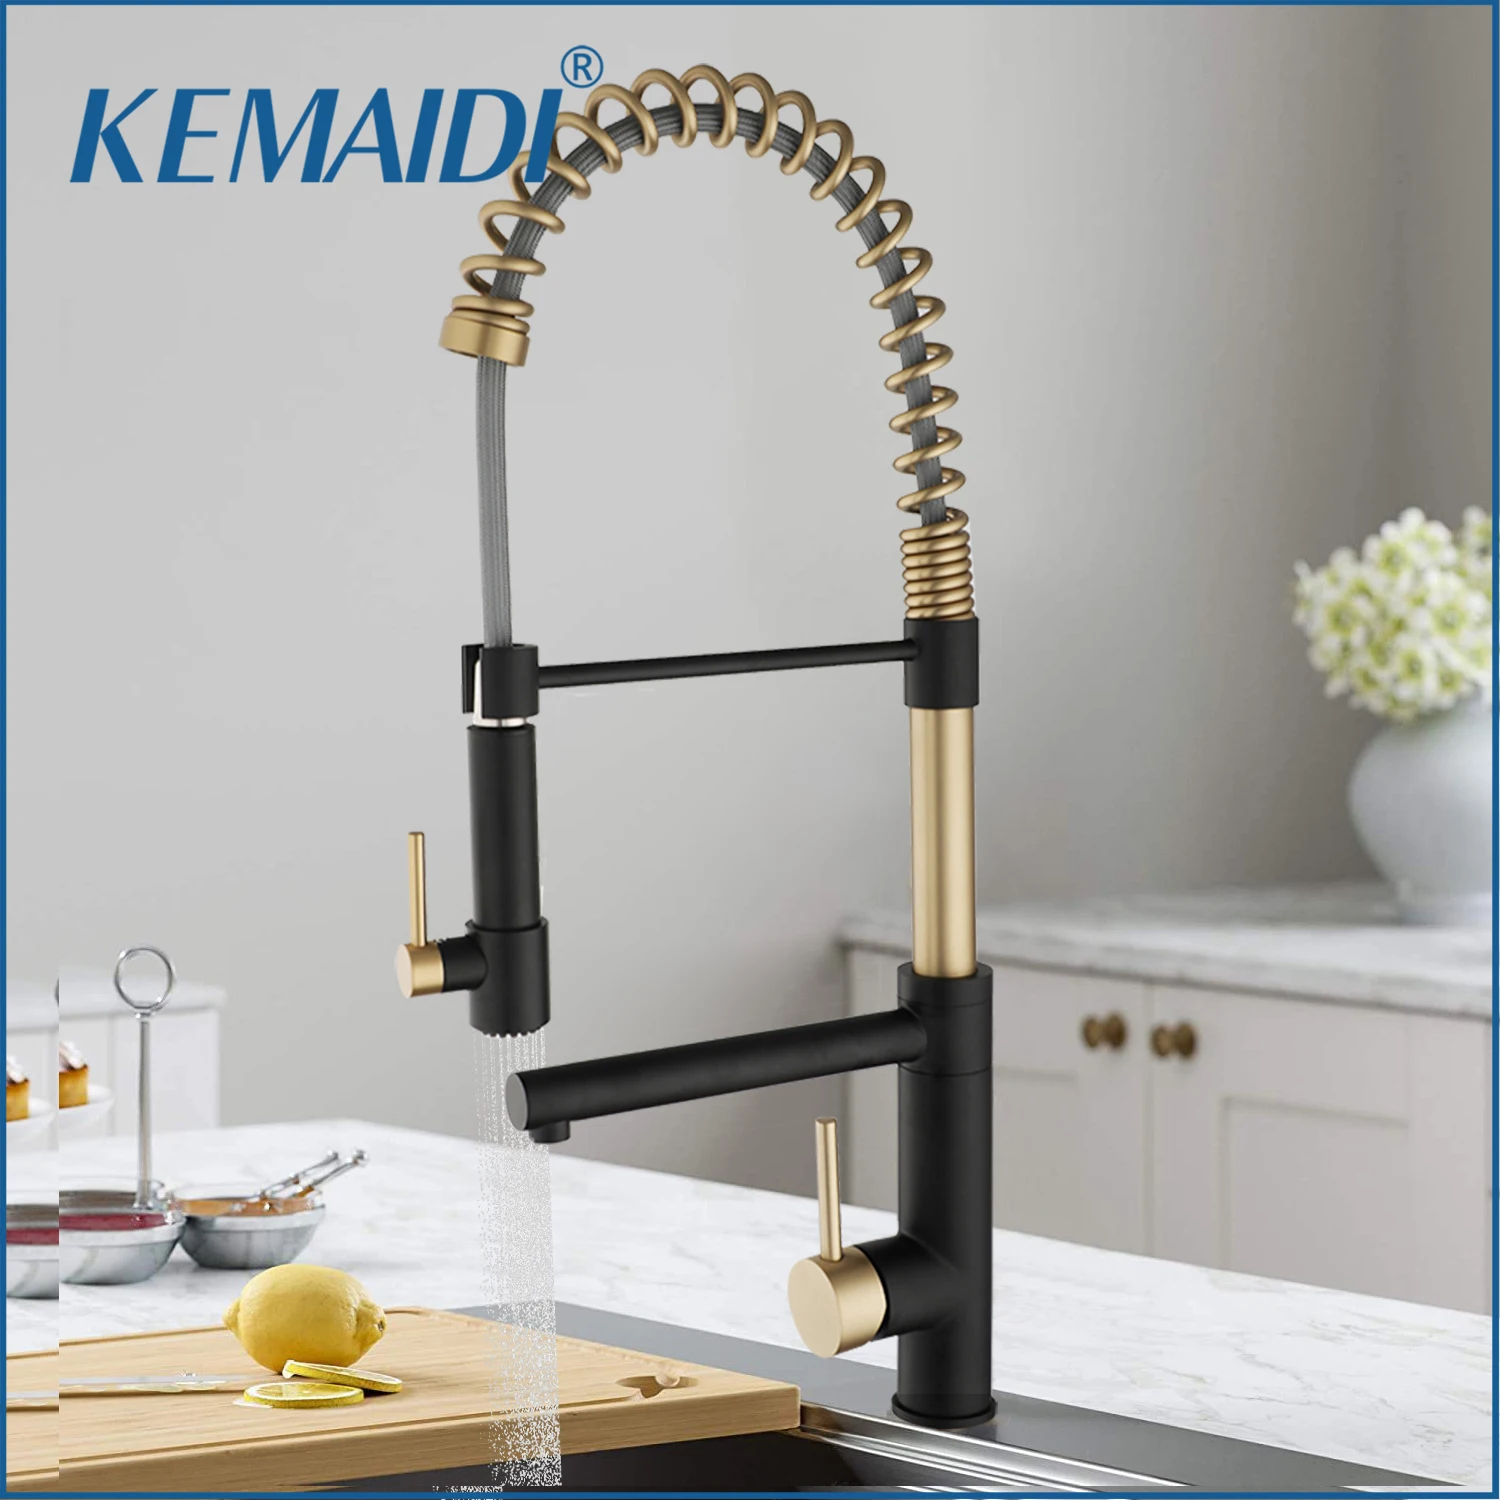 KEMAIDI Black&Brush Gold Gourmet Kitchen Spring Faucets Kitchen Sink Faucet Hot Cold Water Mixer 360 Degree Rotation Tap